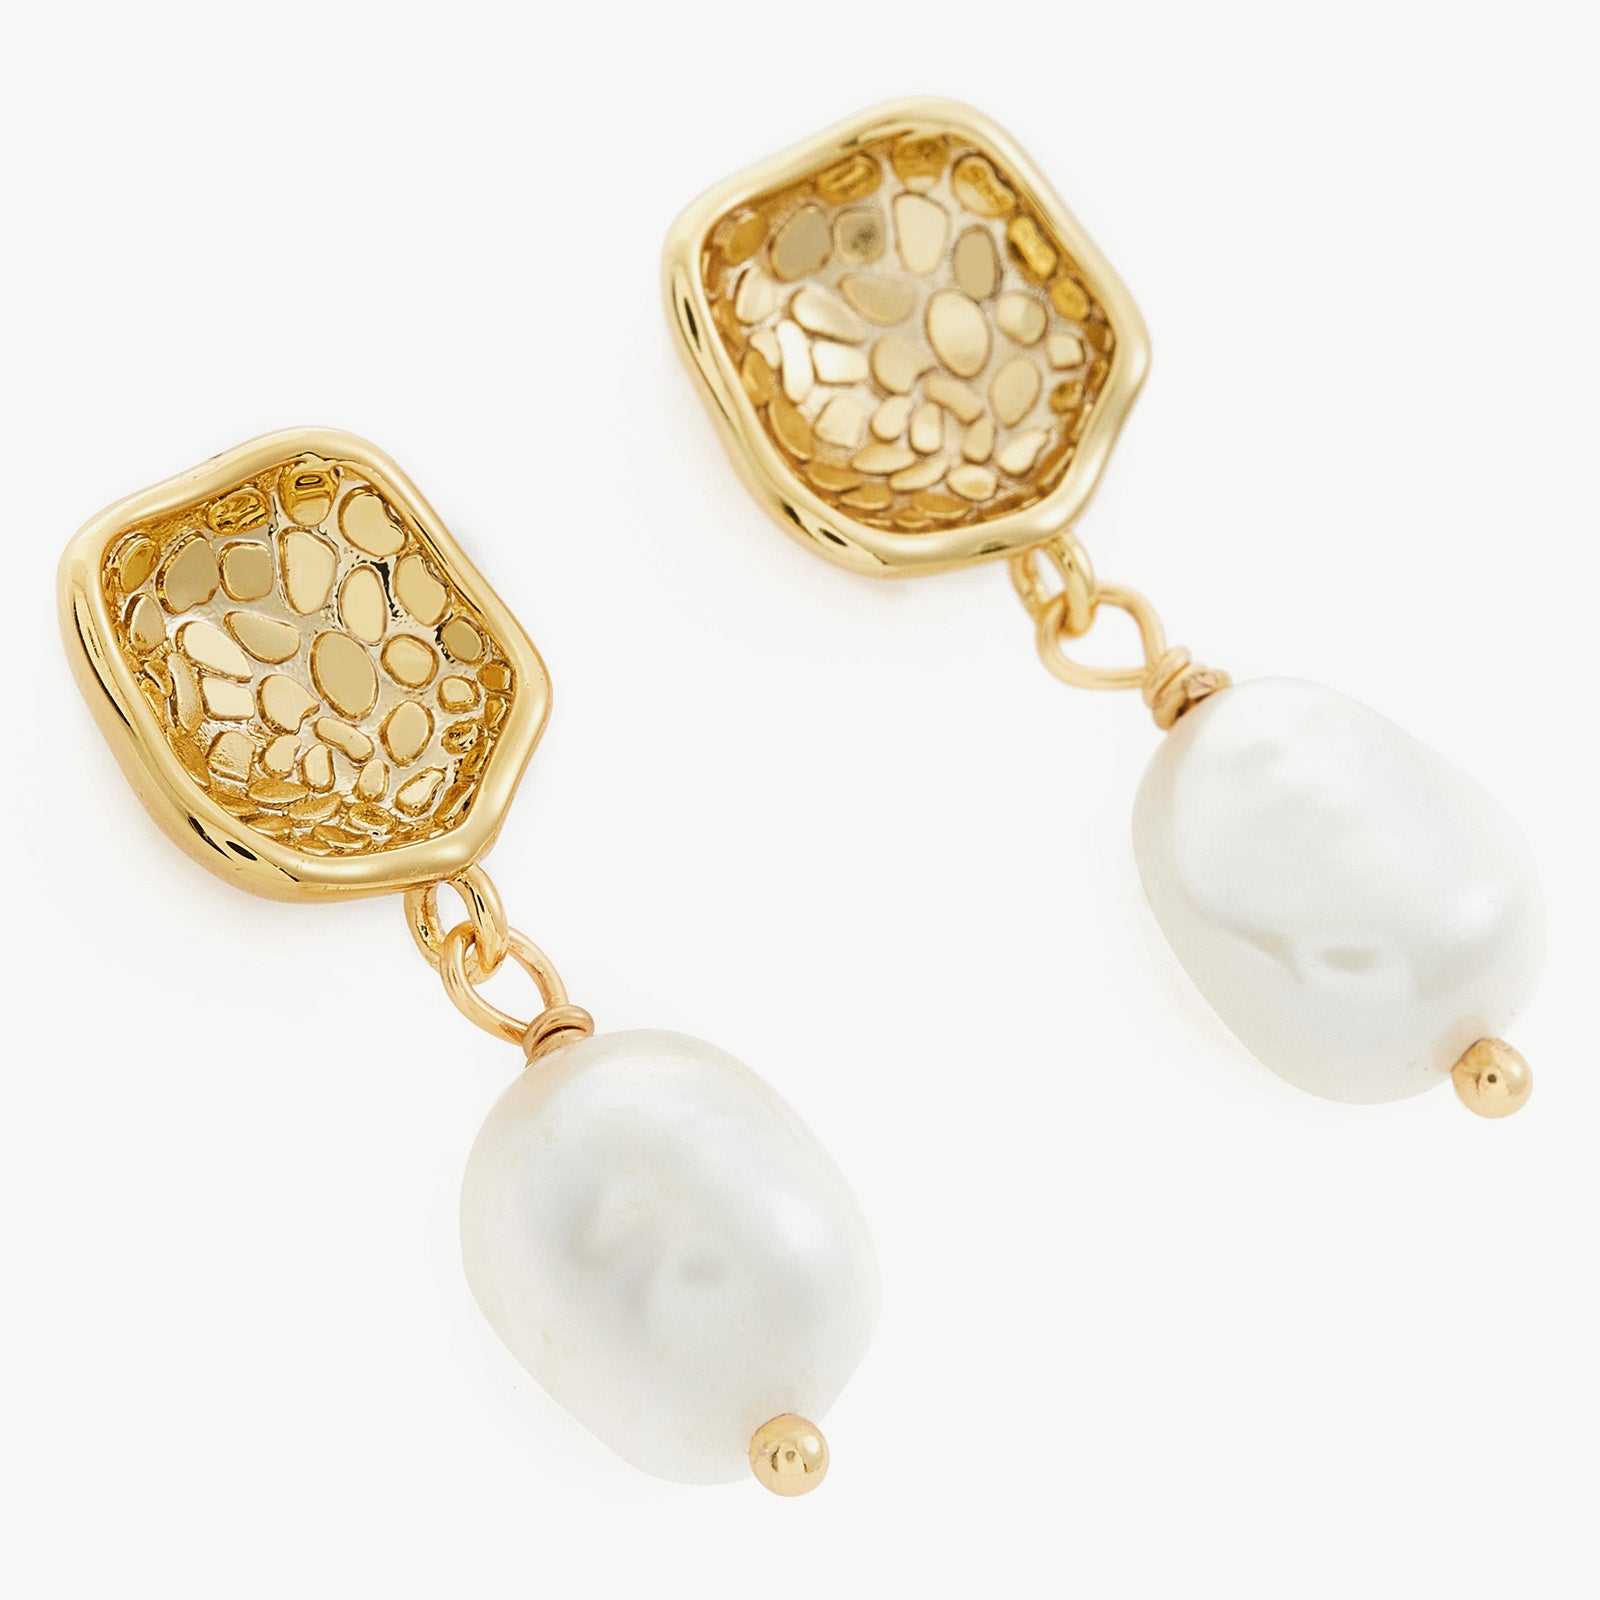 Molten Baroque Pearl Drop Earrings, adorned with gilded molten metal accents, these earrings exude grace and luxury, adding a touch of opulence to your ear ensemble